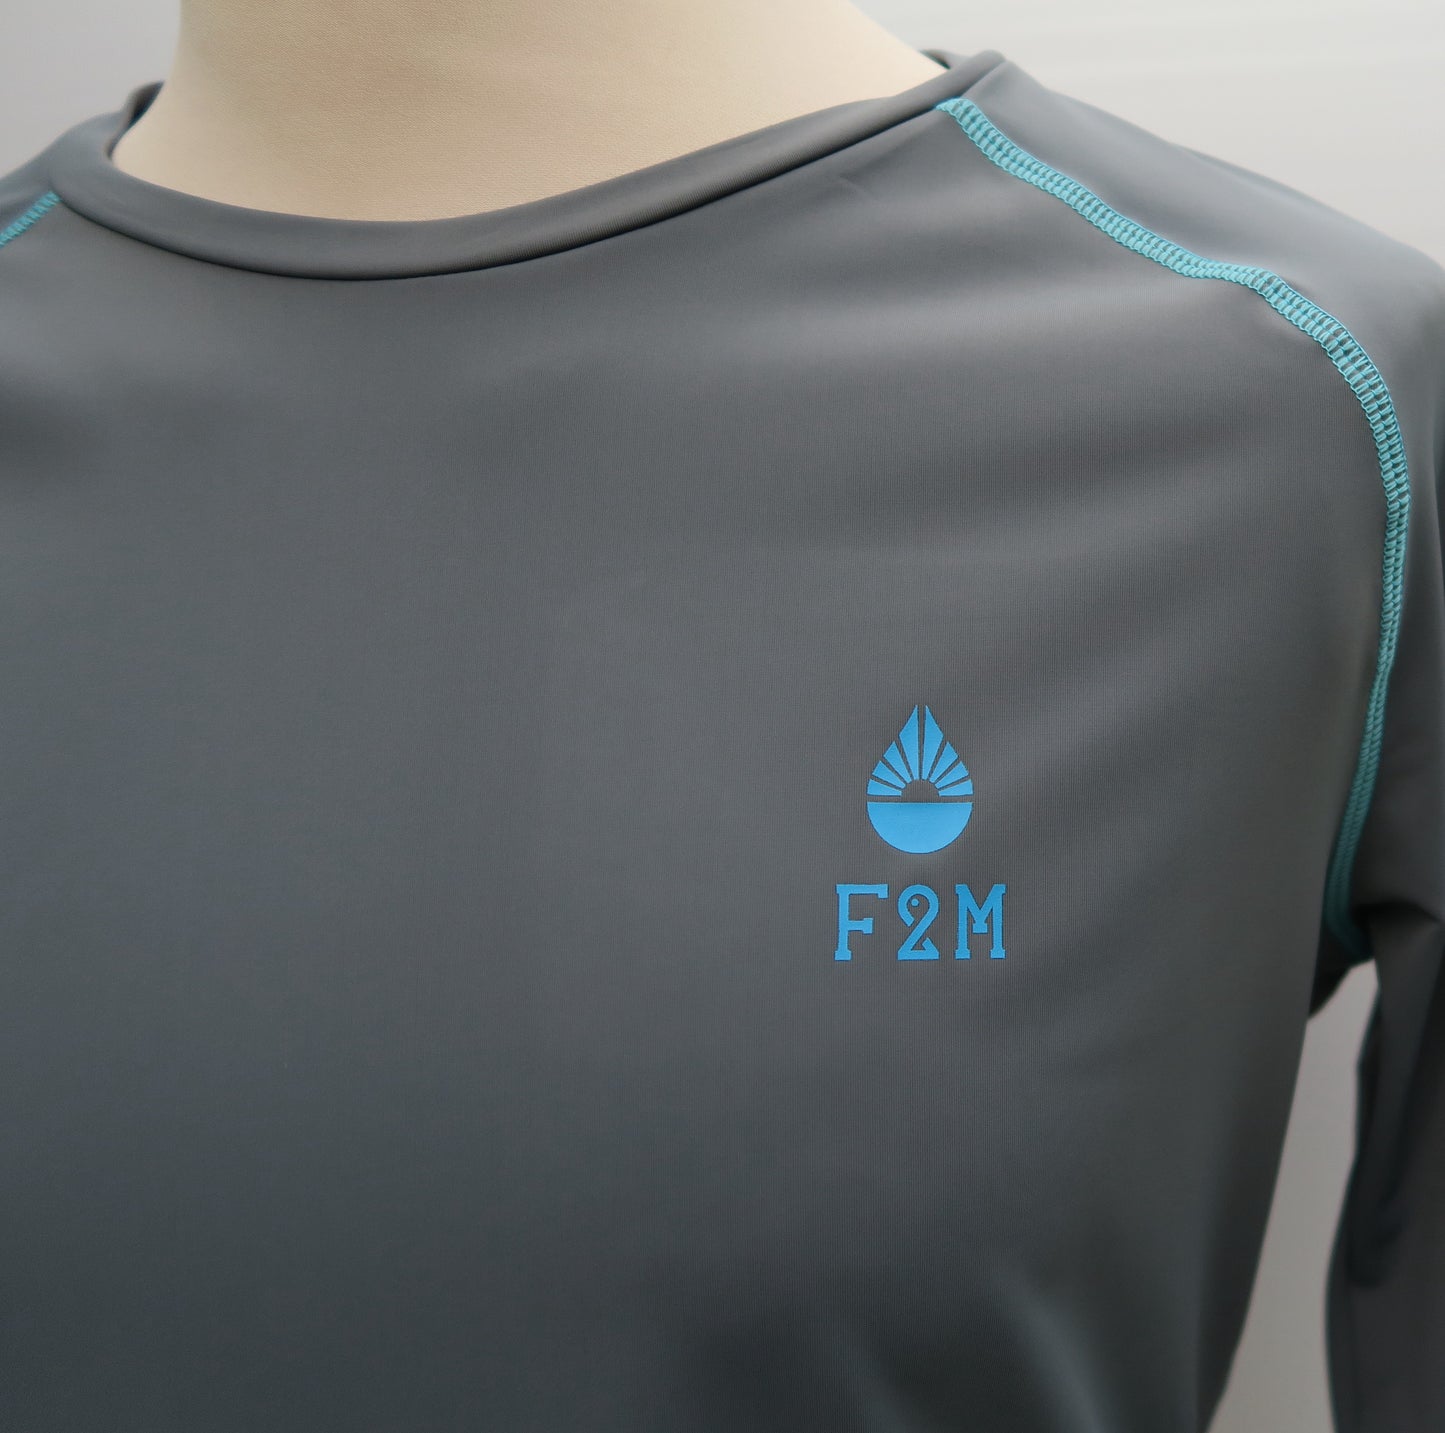 Men grey rashguard made in France from ghostnets